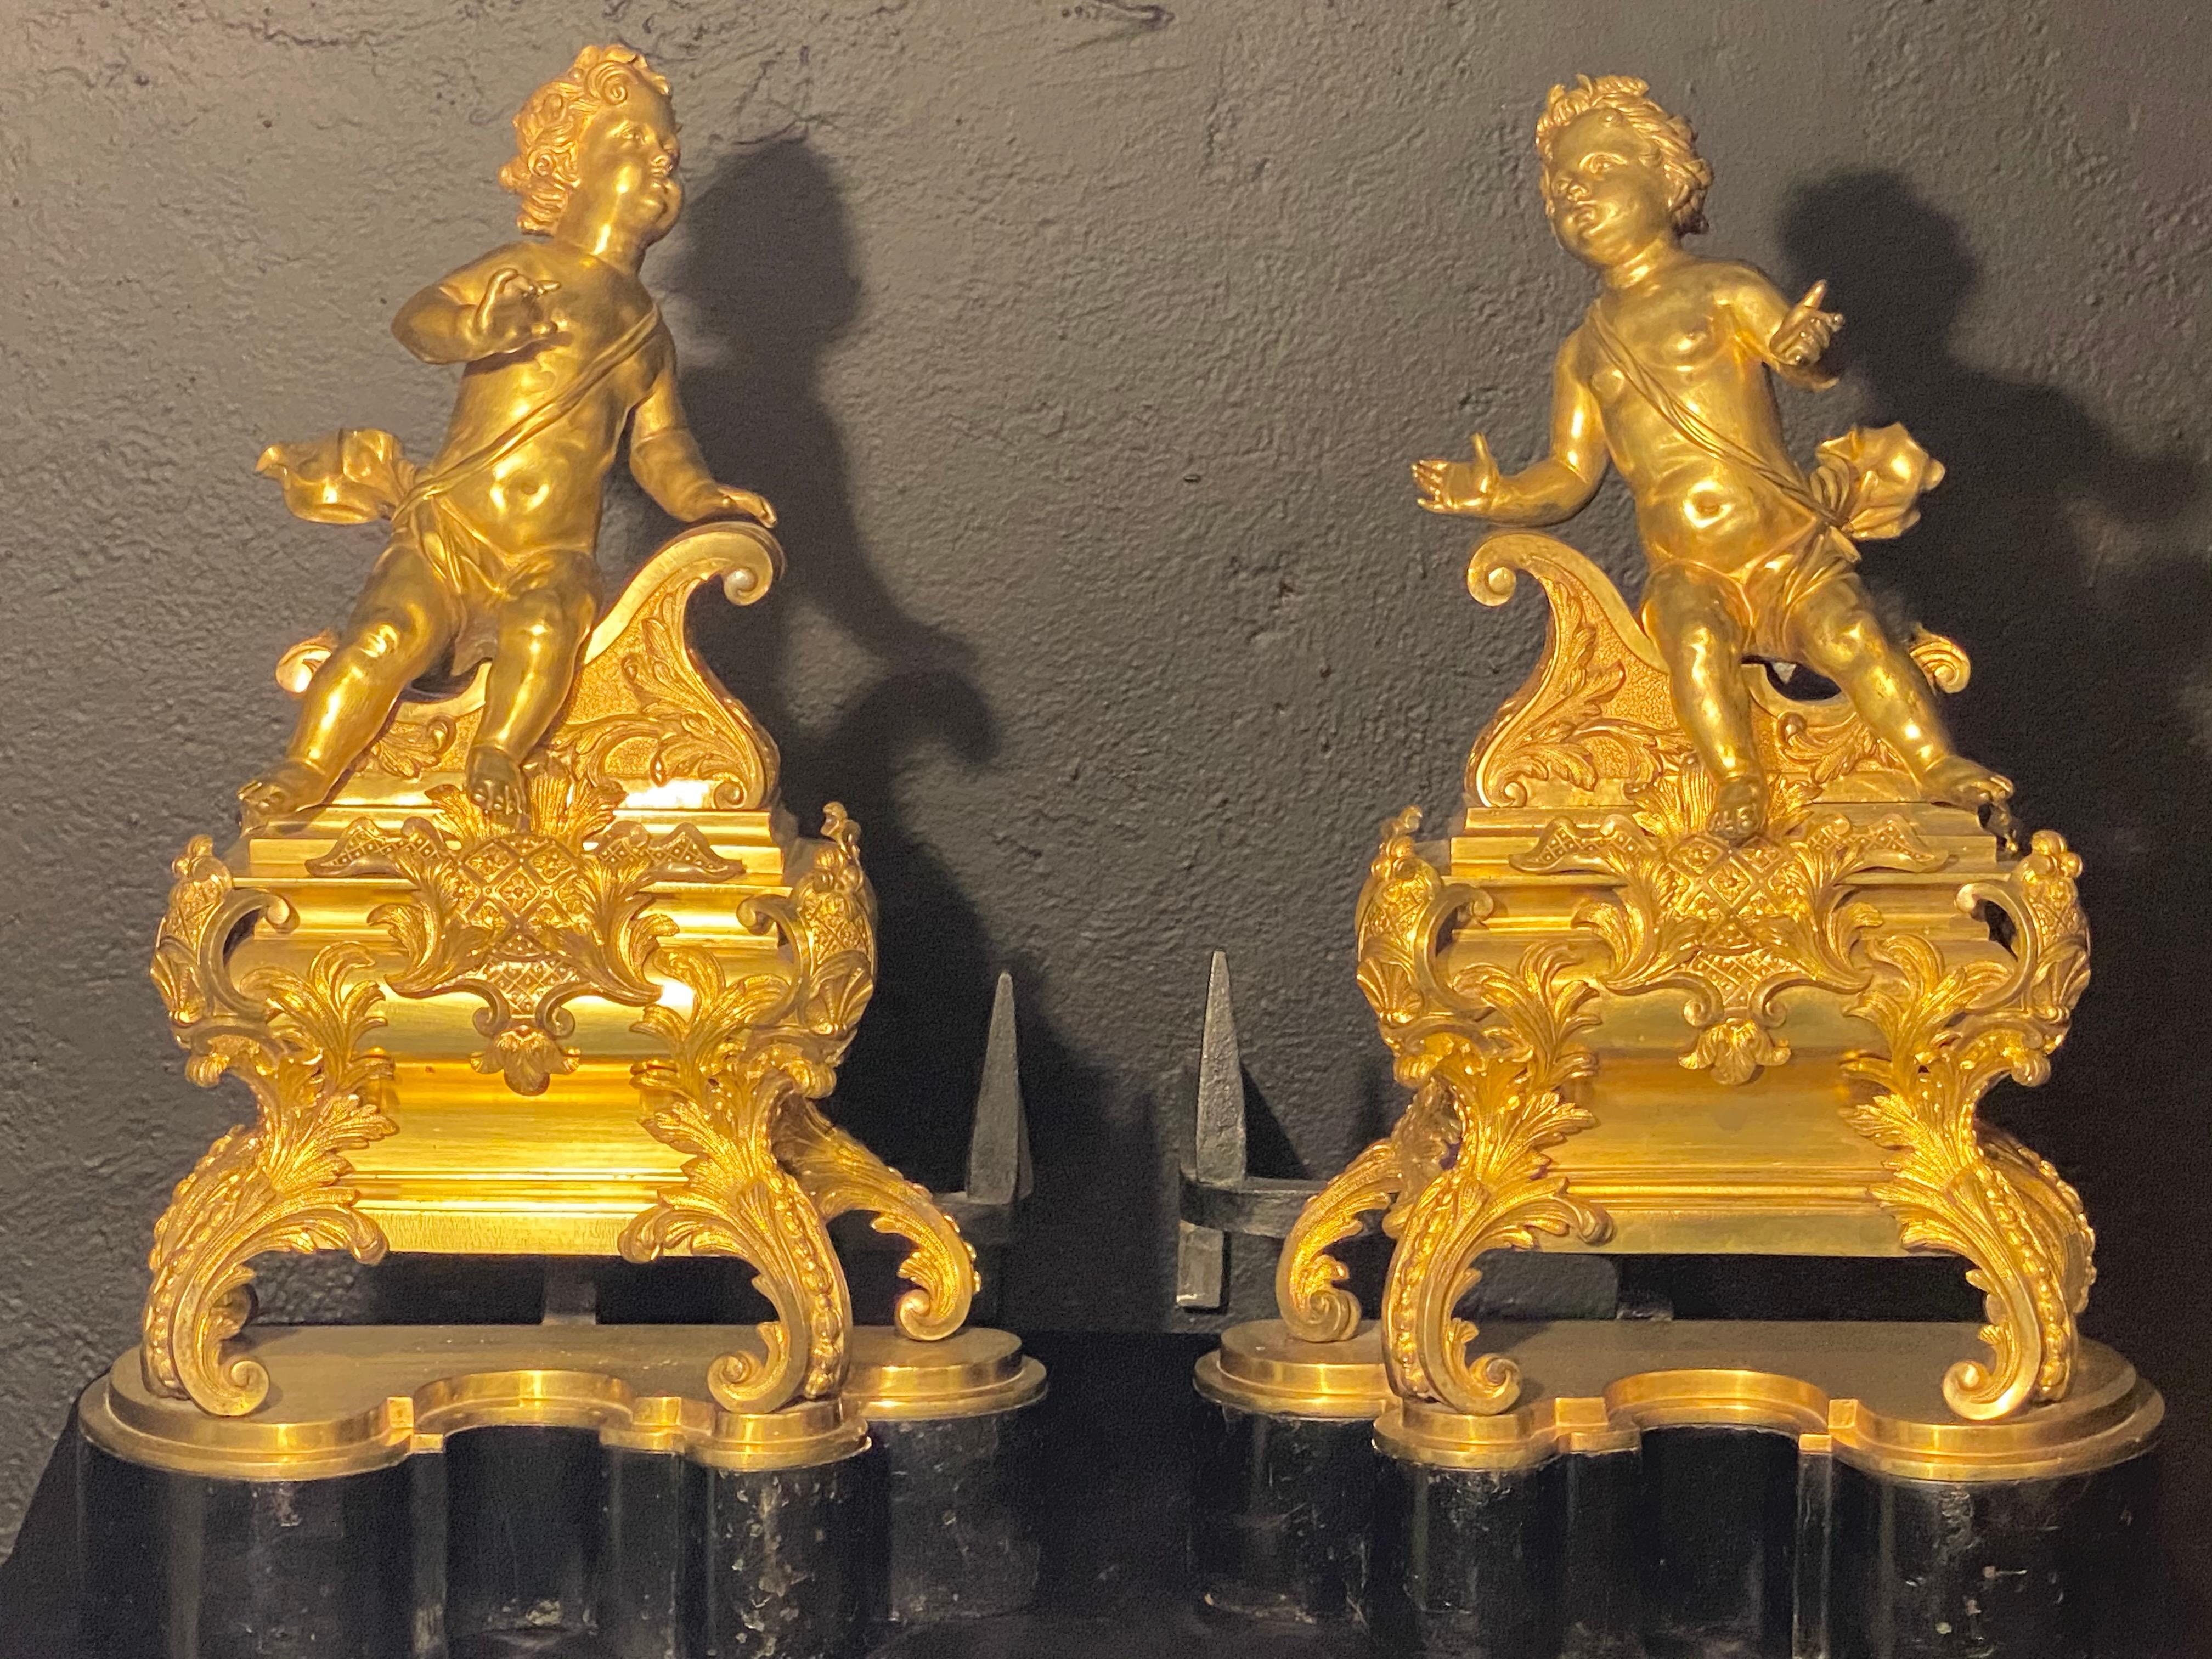 19th century French Louis XVI style Andirons. Opposing cherubs on stands in doré Bronze. This spectacular large and impressive pair of andirons are certain to spark controversy. Each having a fine doré gilt bronze finish with a pair of cherubs